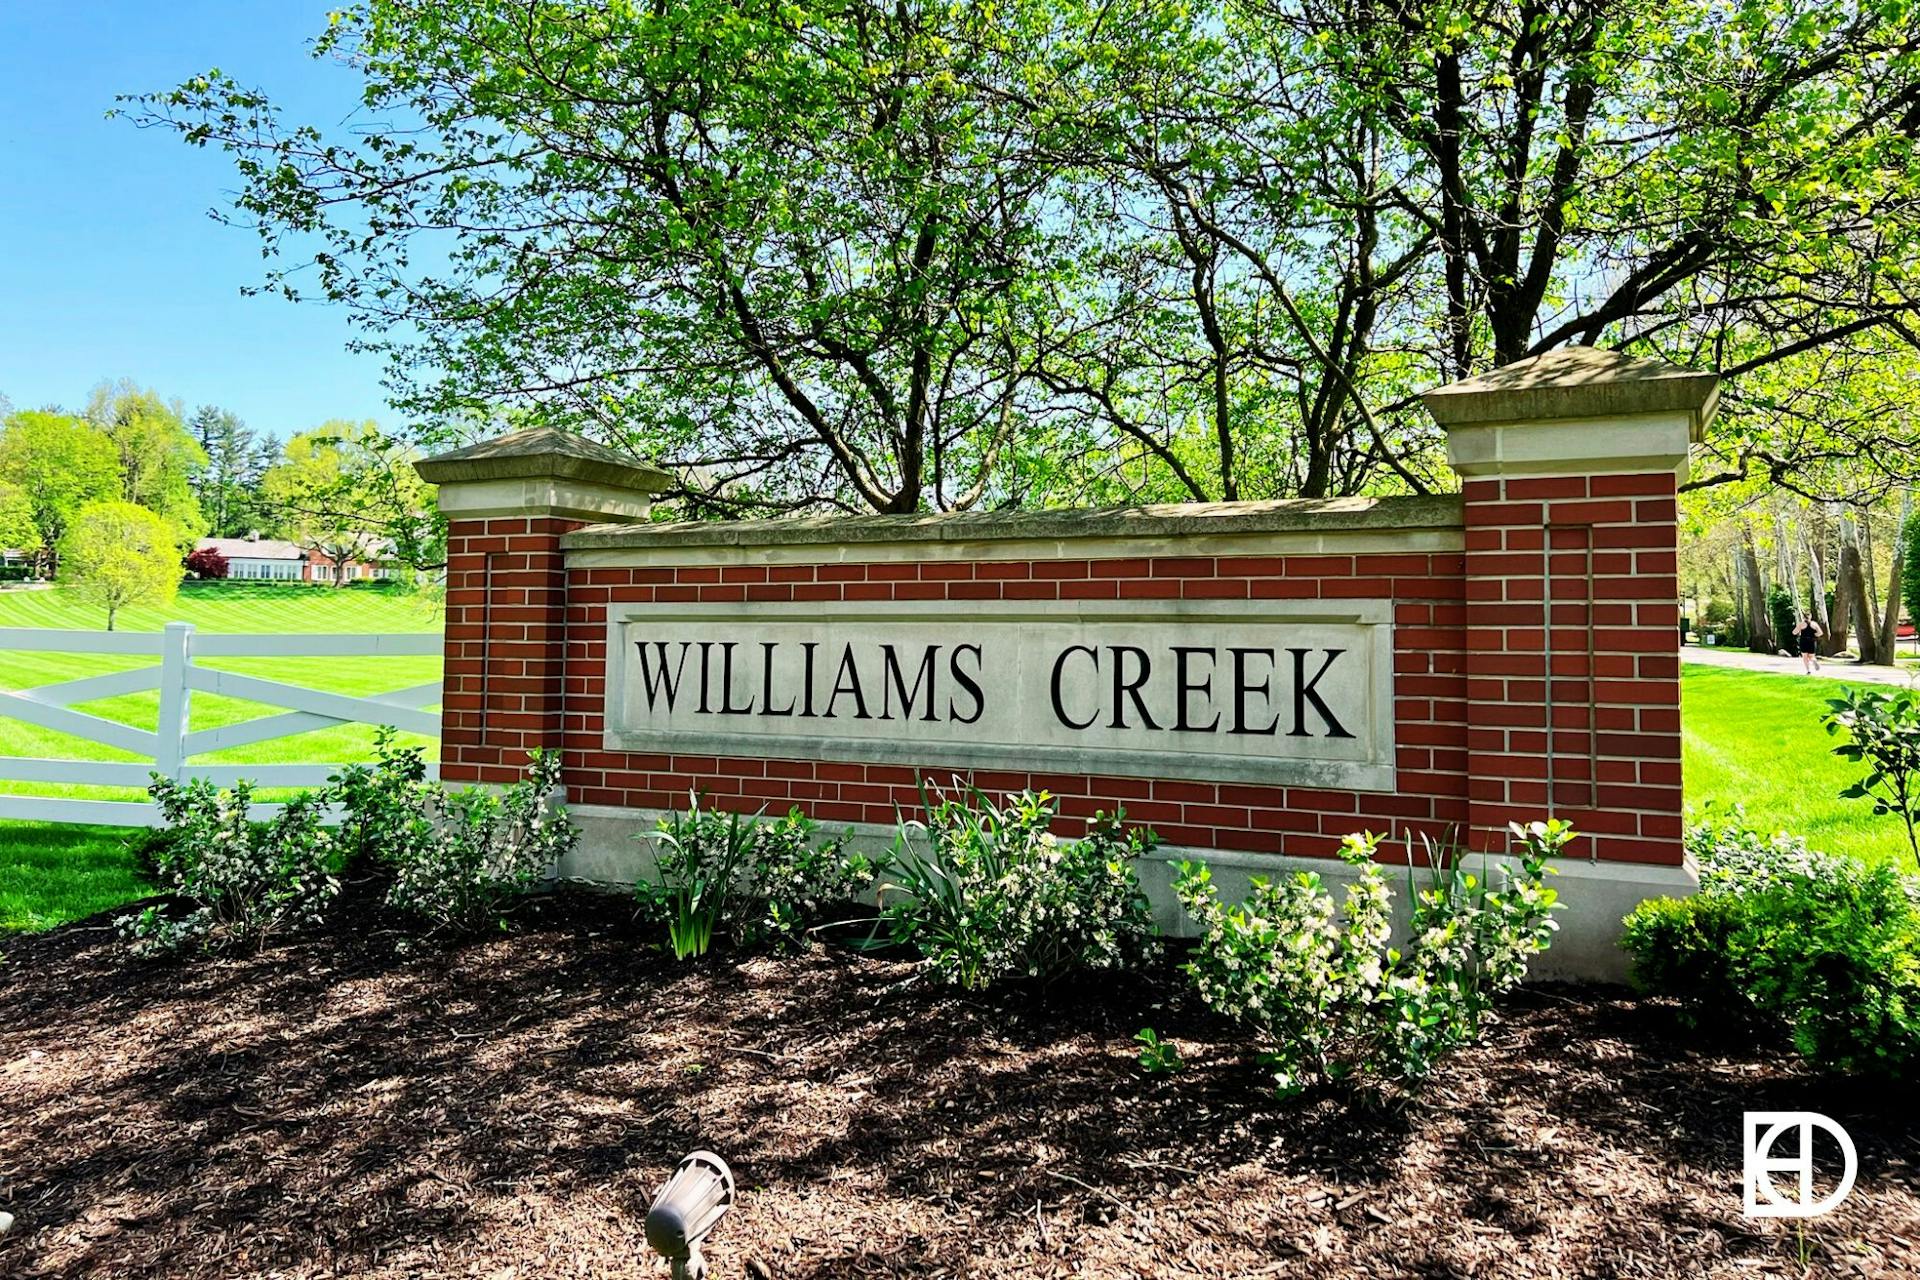 Photo of signage at entrance to Williams Creek